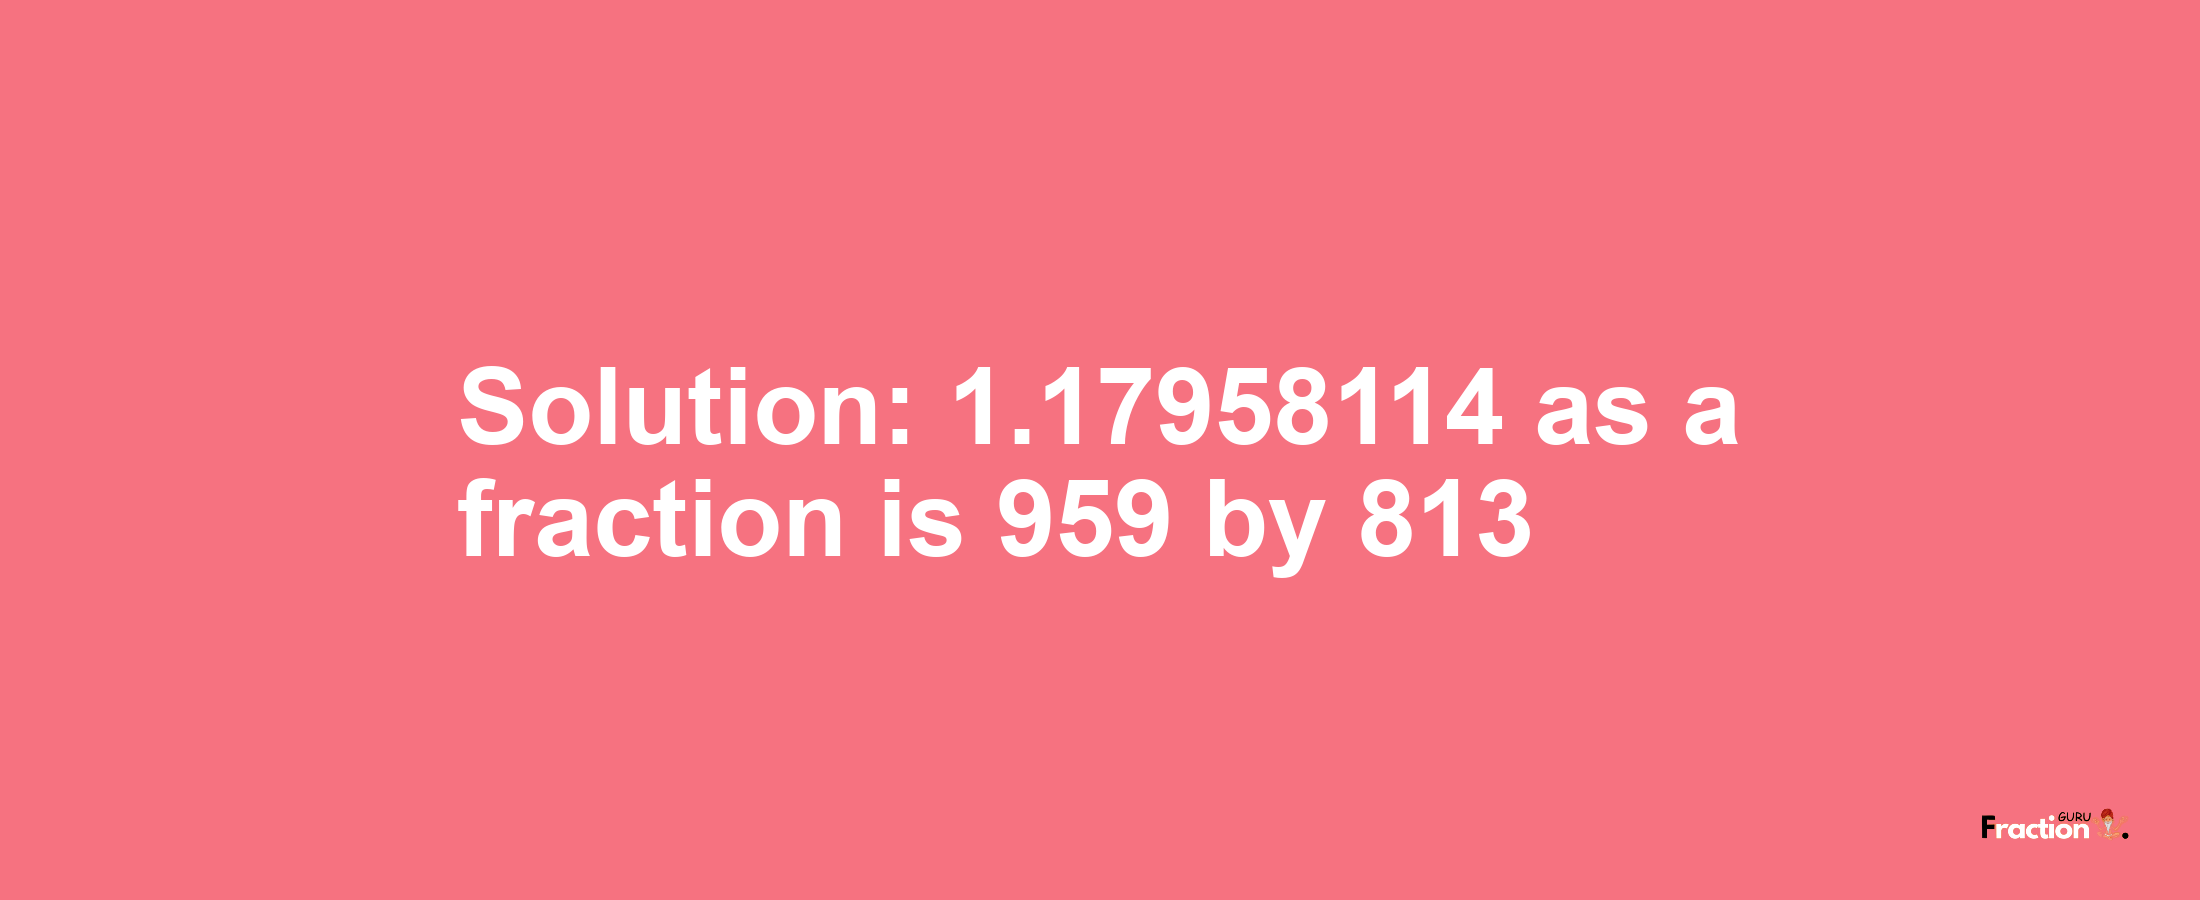 Solution:1.17958114 as a fraction is 959/813